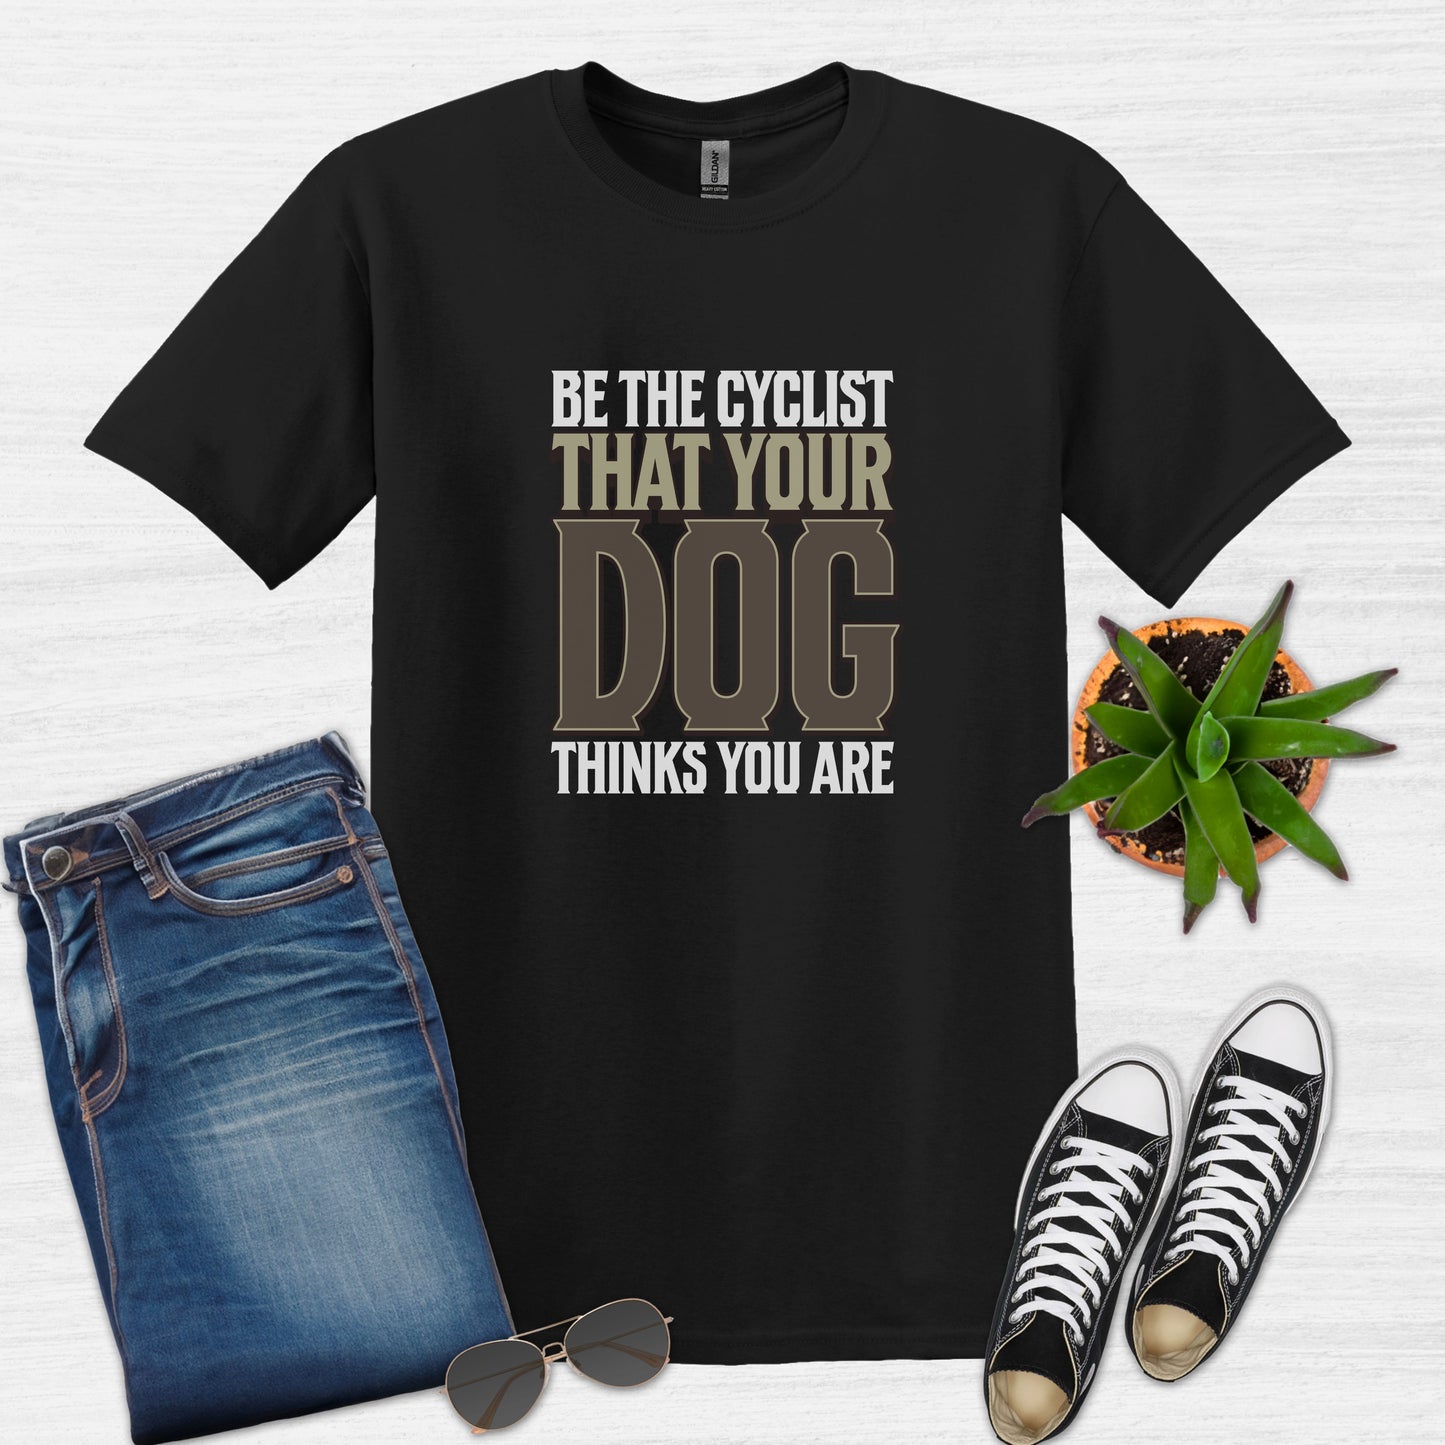 Bike Bliss Be the cyclist that your dog thinks you are T-Shirt for Men Size Black